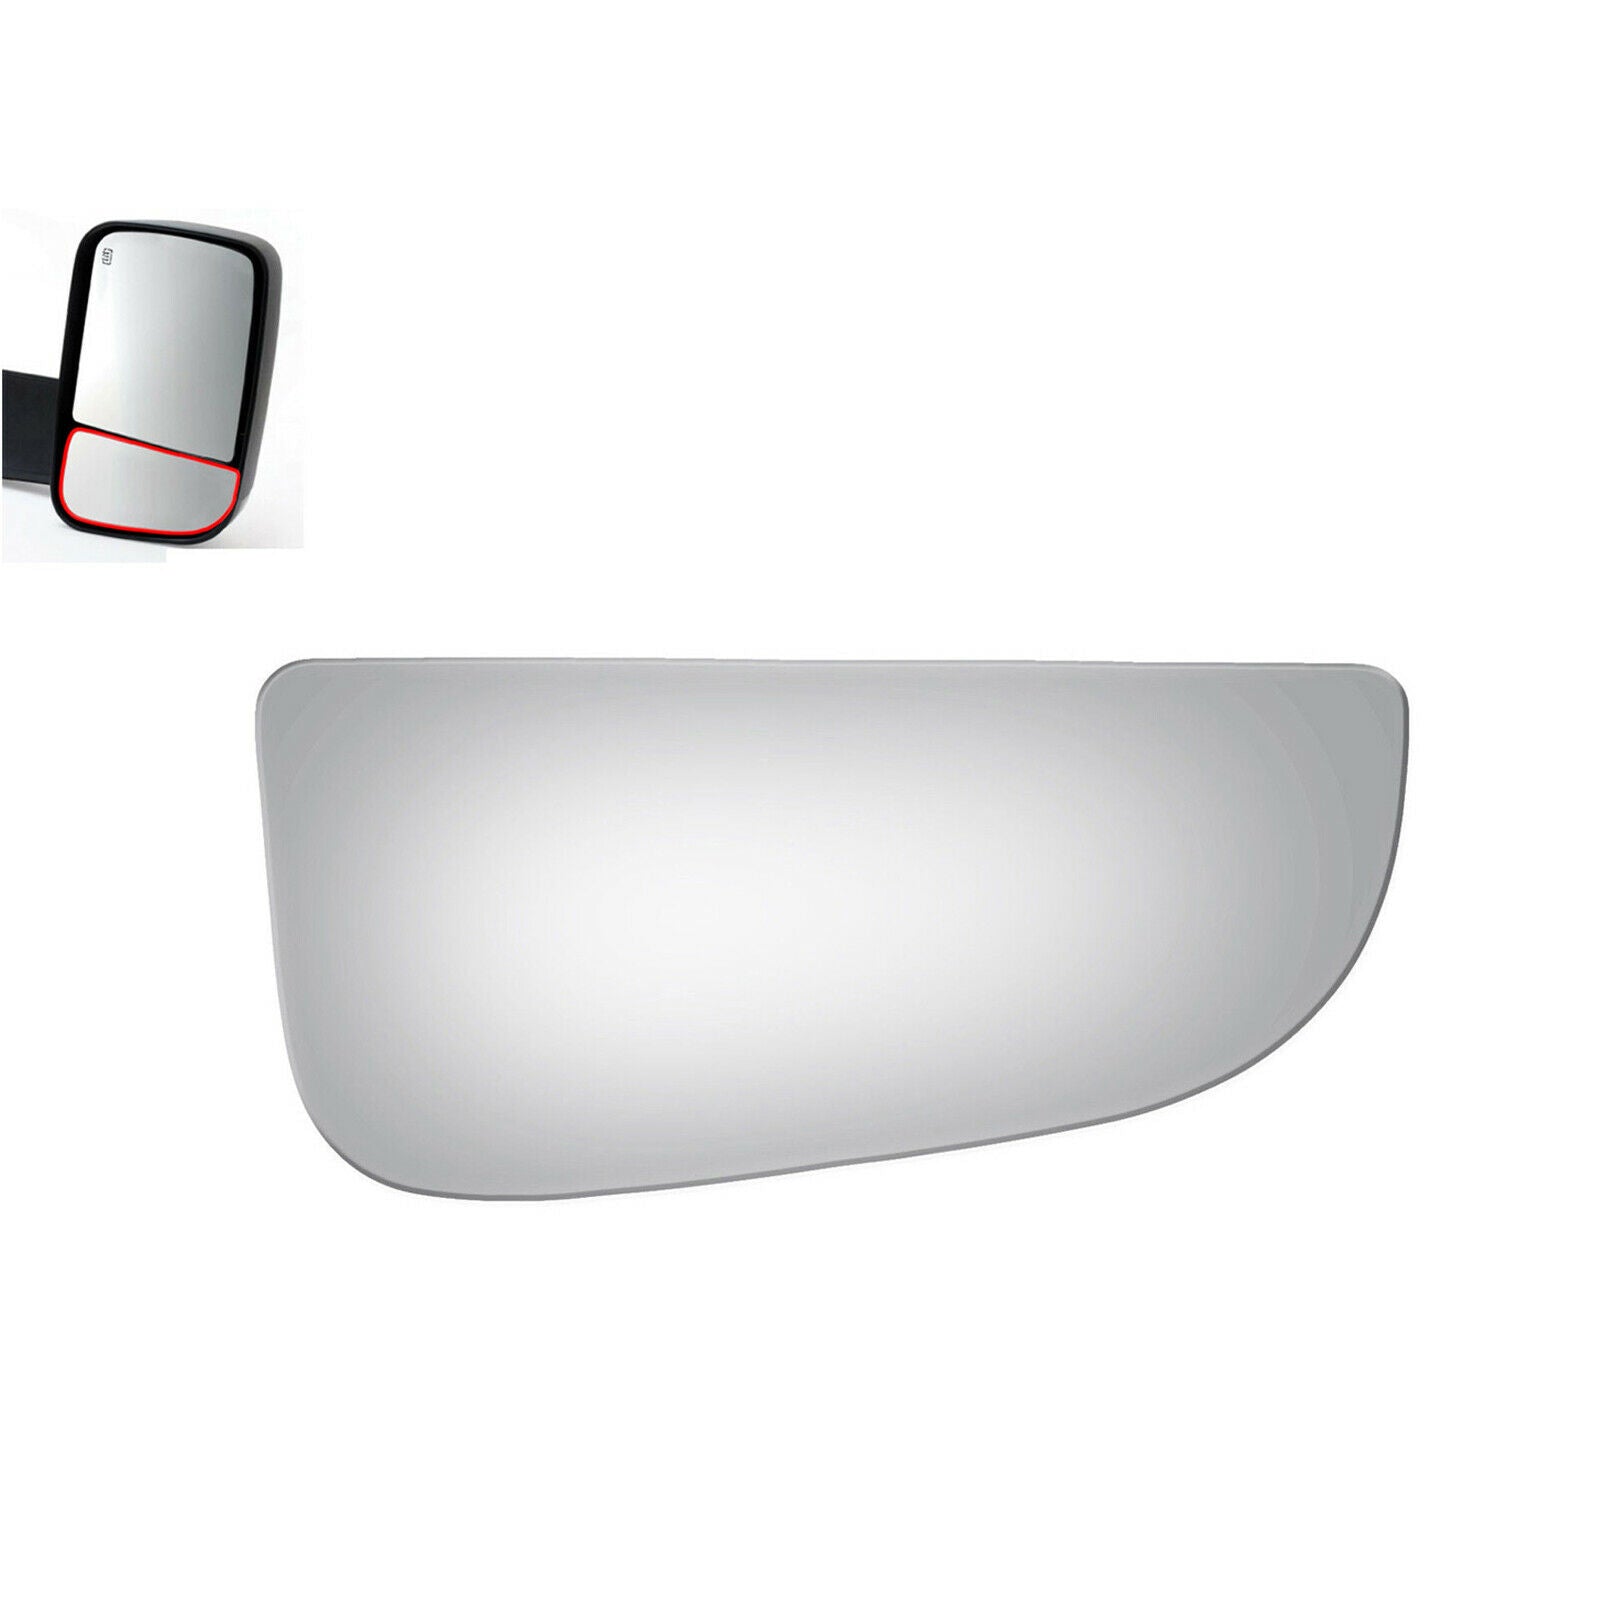 WLLW Lower Towing Replace Mirror Glass for 2010-2023 Dodge Ram Pickup Full Size, Driver Left Side LH/Passenger Right Side RH/The Both Sides Convex M-0007